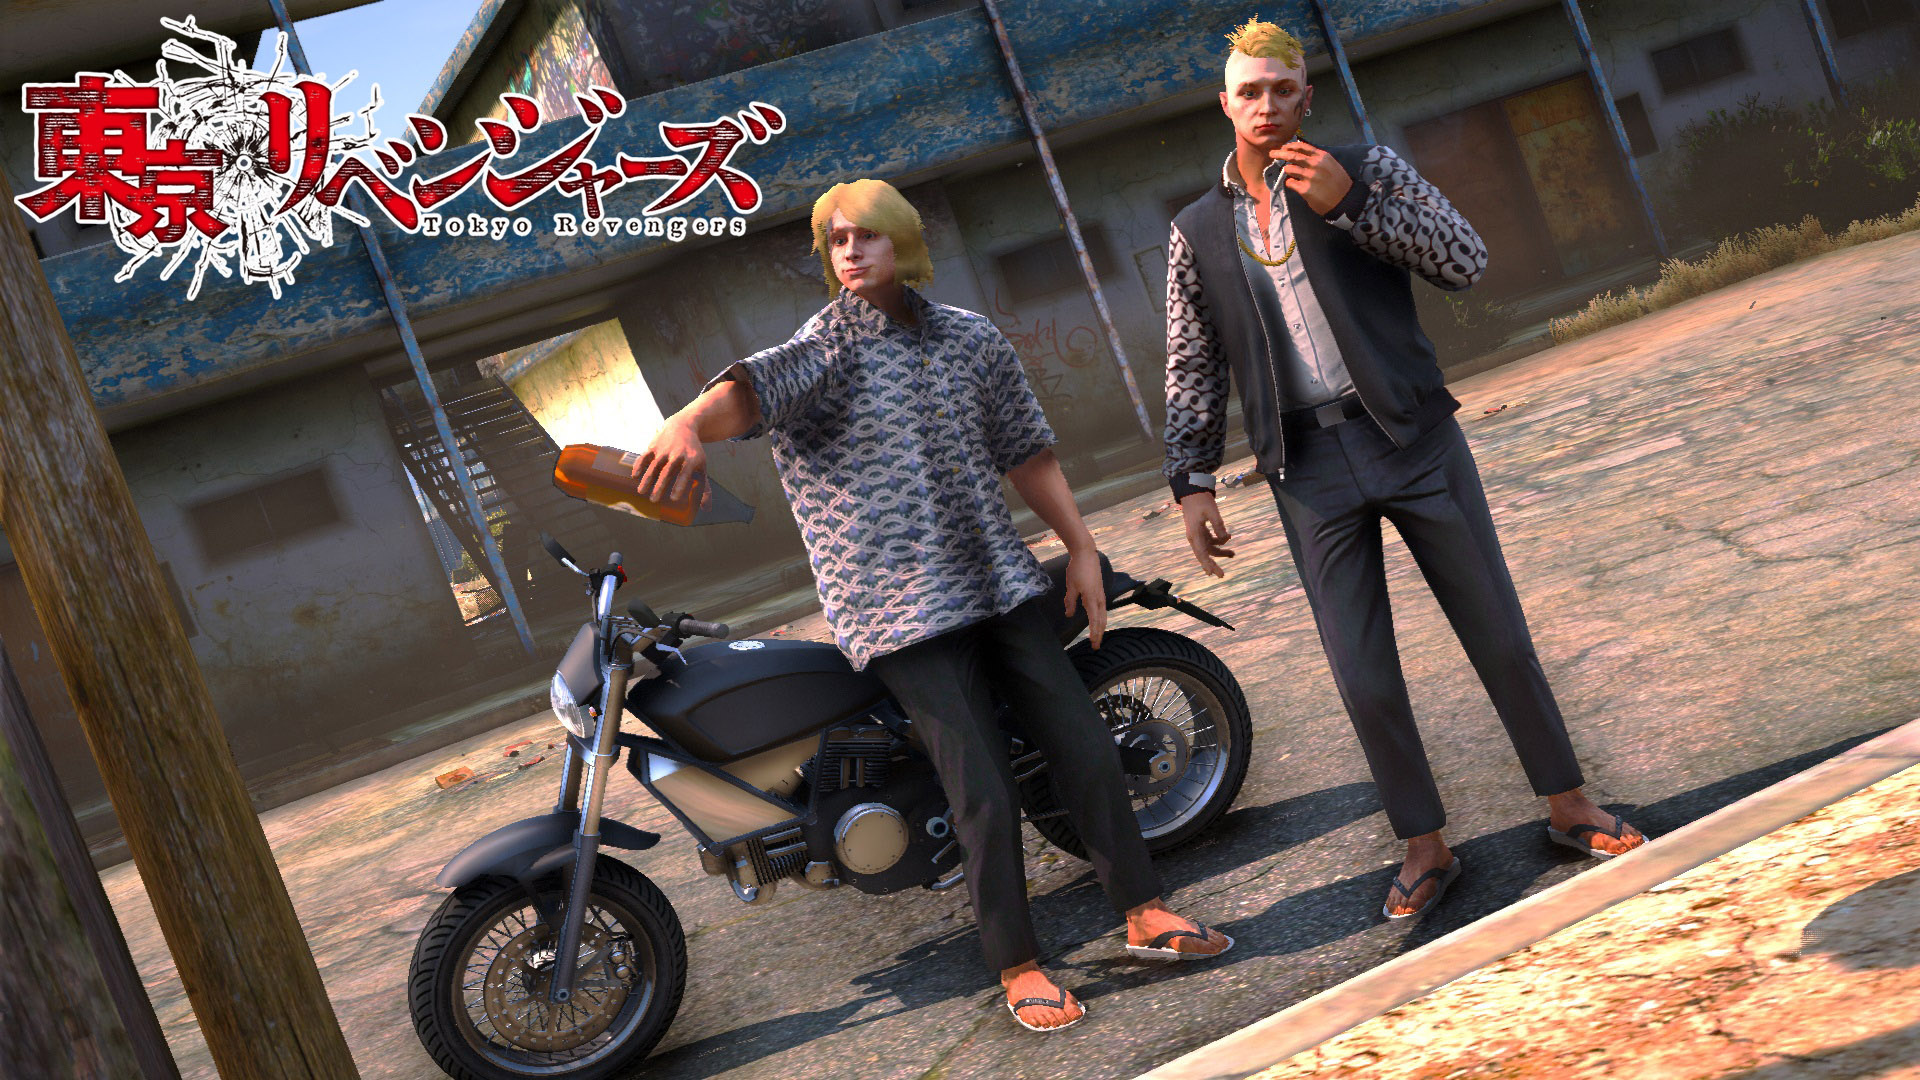 Yakuza Online - Tokyo Revengers Collab/Can I Get Mikey And Draken